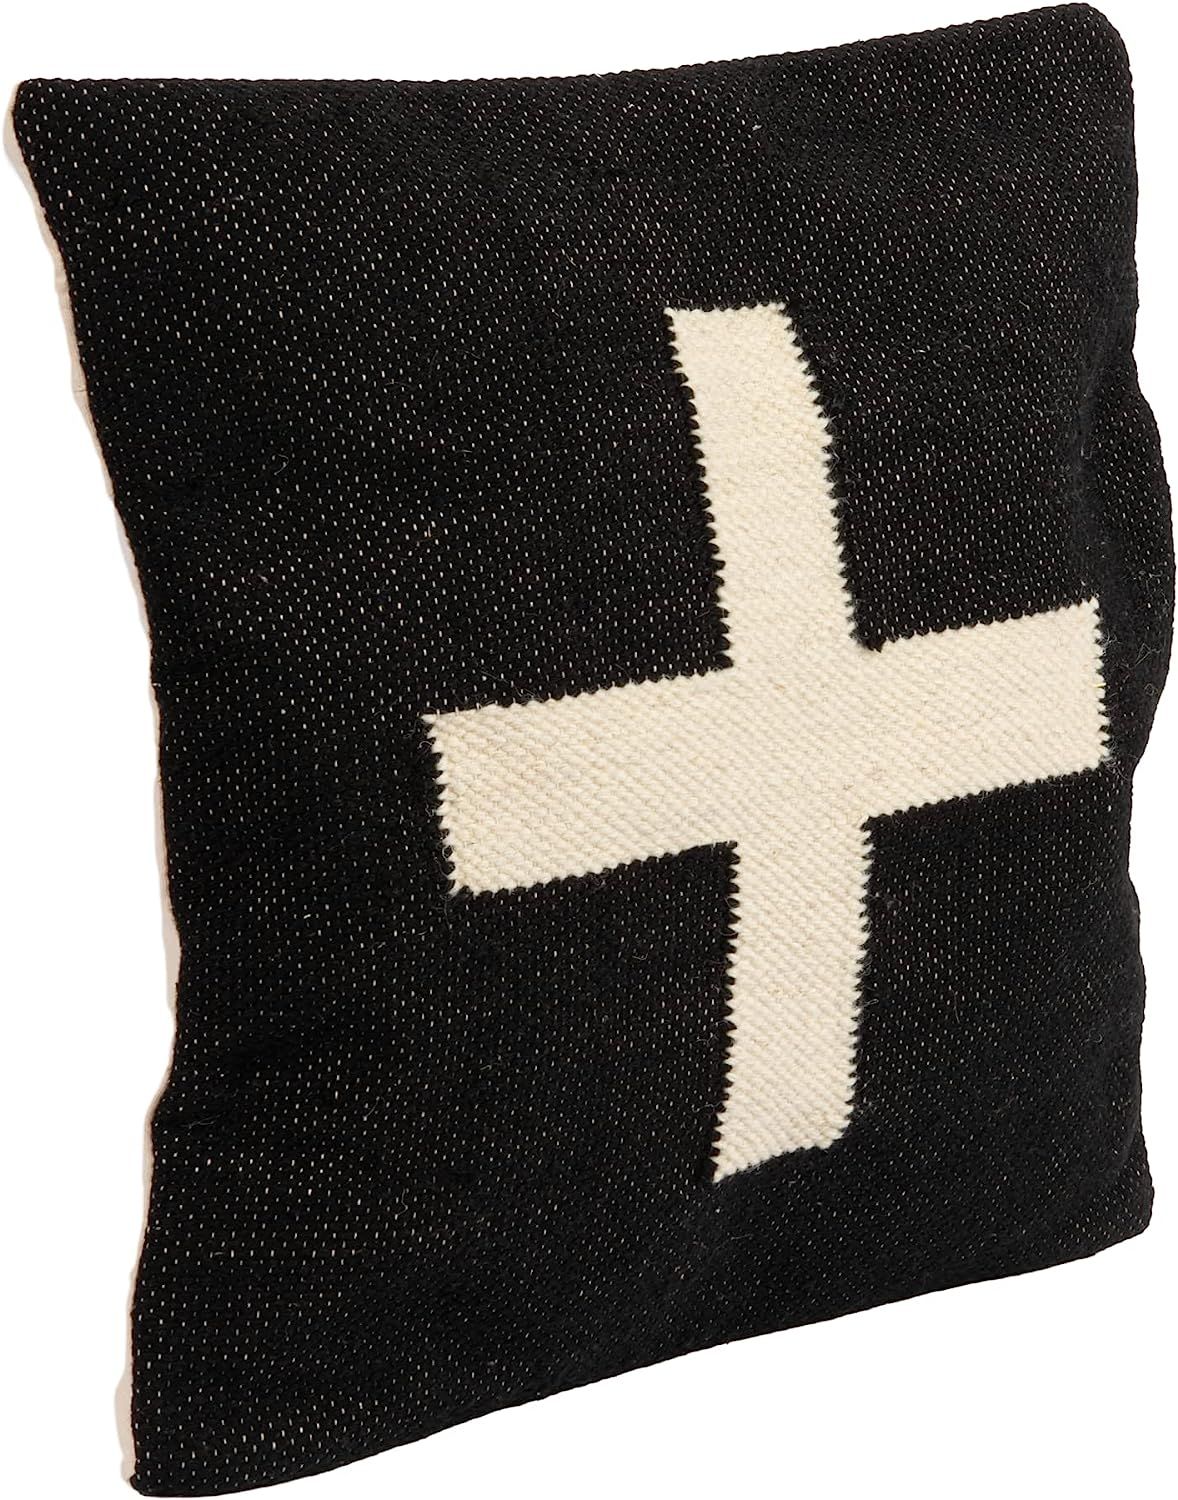 Creative Co-Op Wool Blend Pillow with Swiss Cross, Black and Cream | Amazon (US)